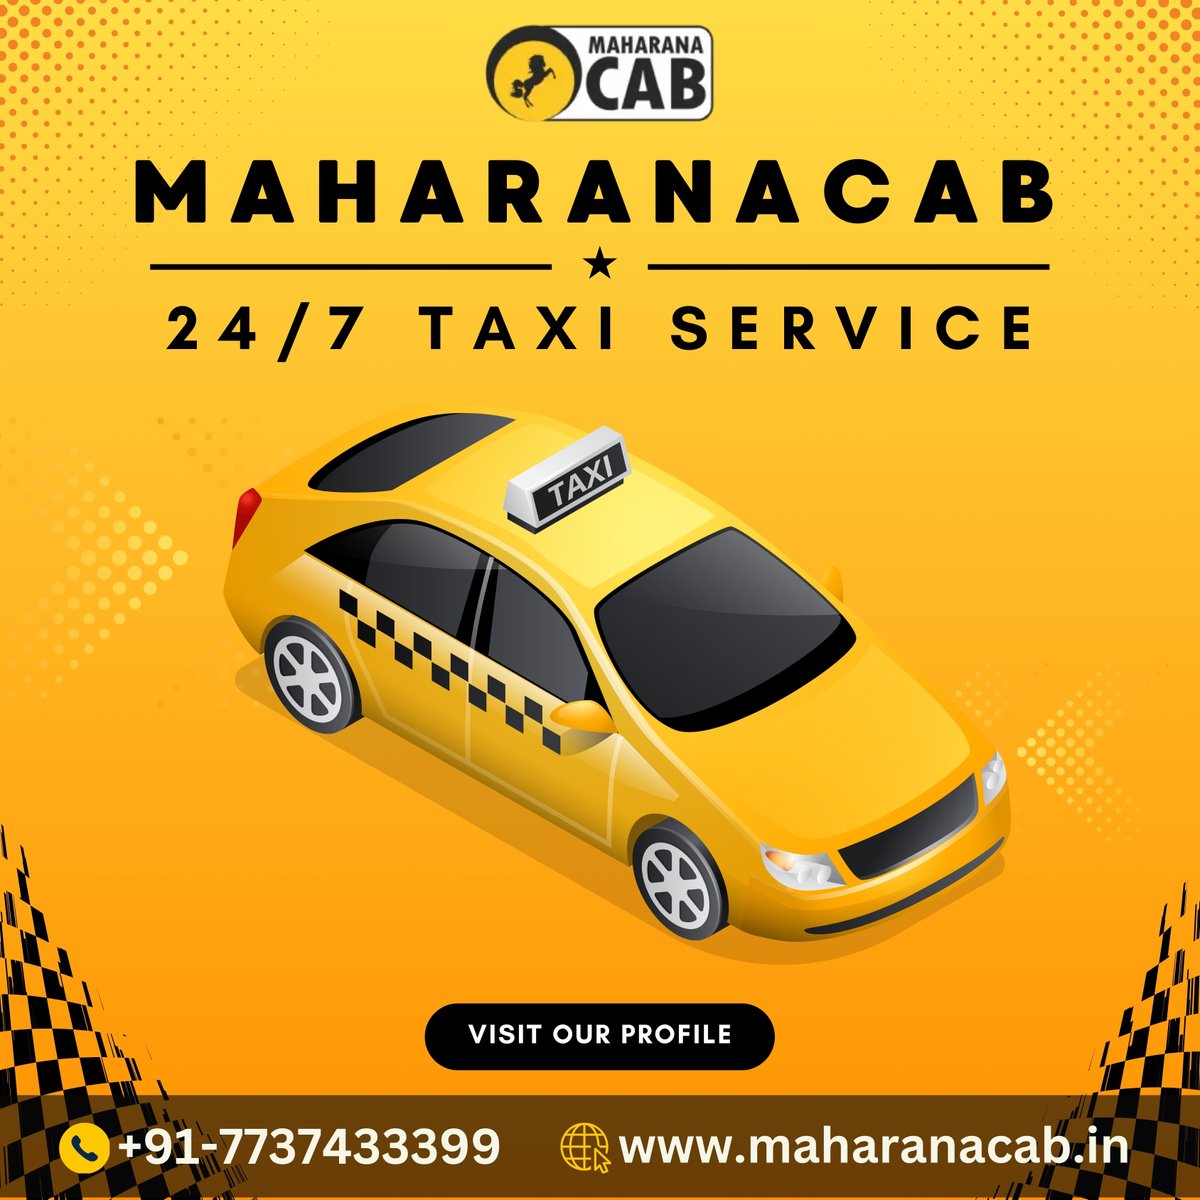 Need a ride in Delhi anytime, anywhere? Look no further! Maharana Cab Delhi offers reliable 24*7 Taxi Service for all your transportation needs. Book a ride with us today!
+91-7737433399
#cars #cabs #taxilife #airporttaxi #driver #cabservices #besttaxi #carrental #taxidrivers